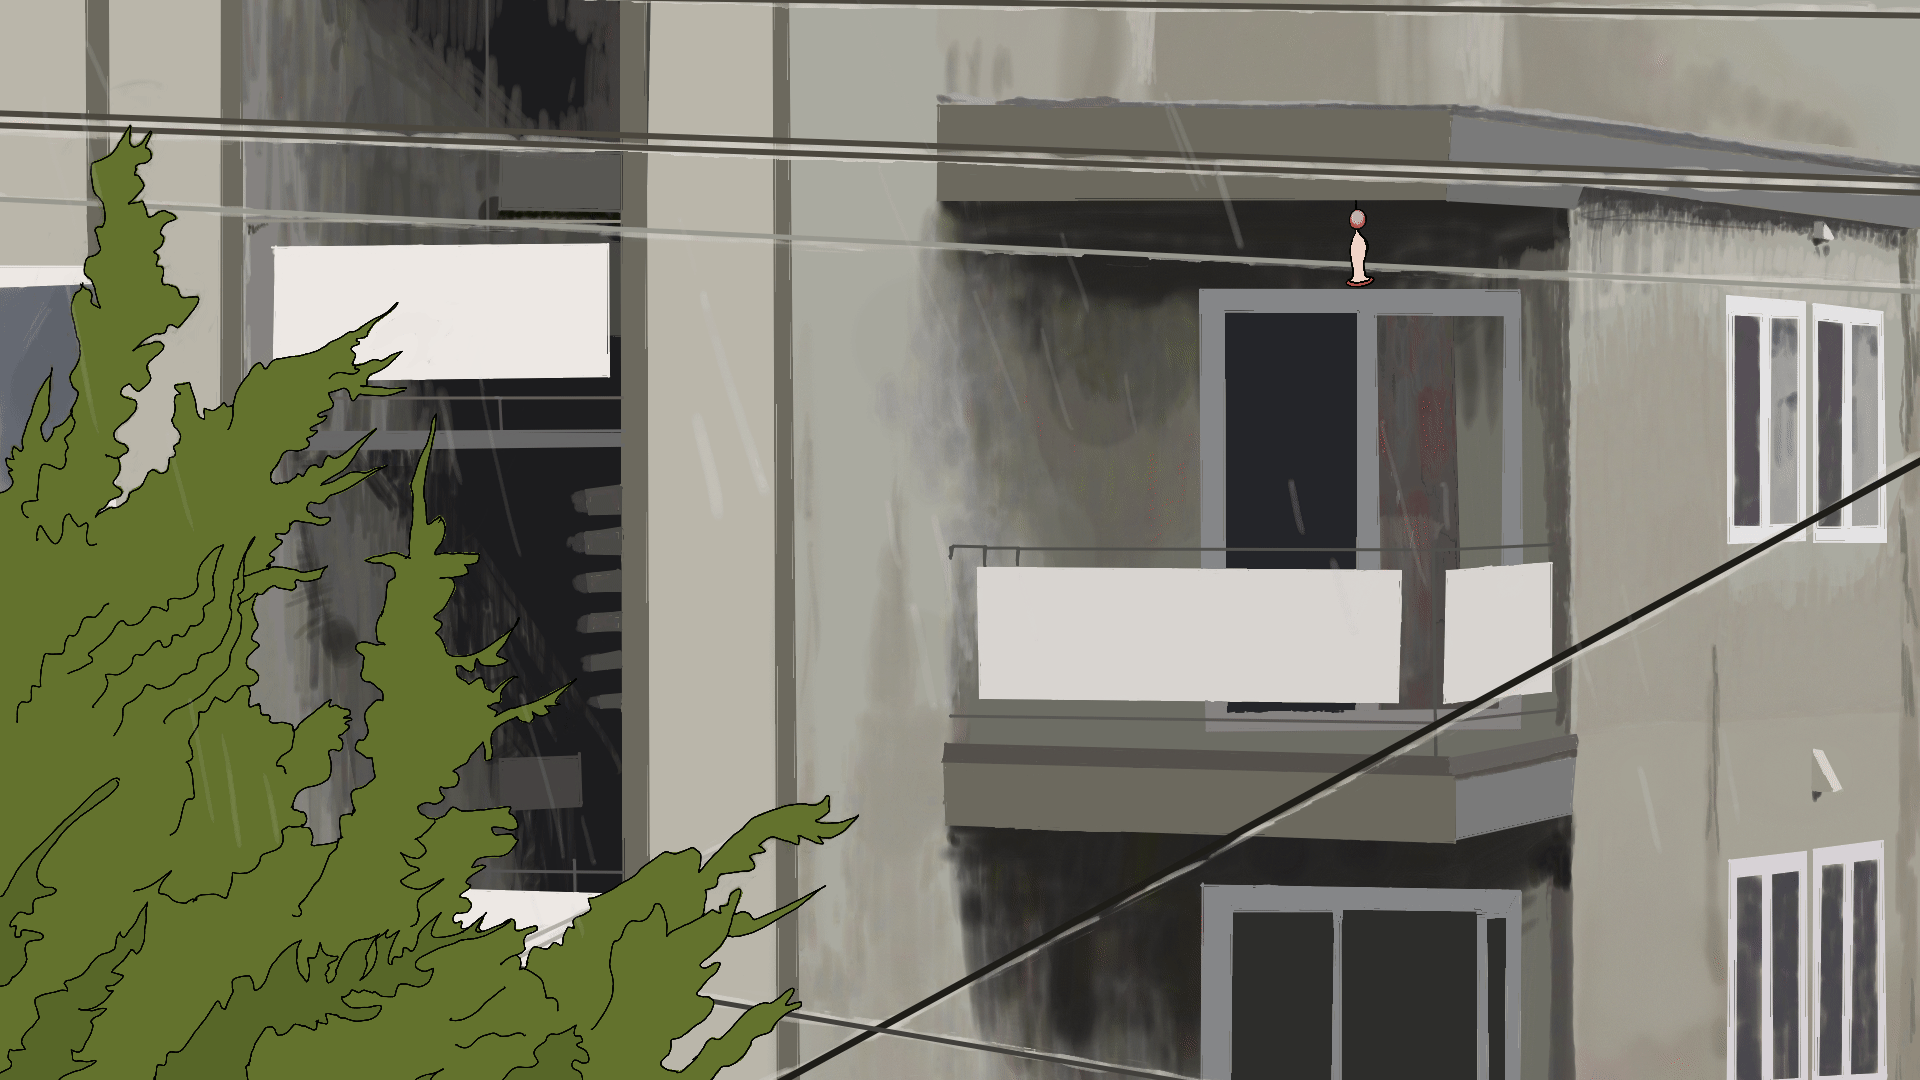 Animation of a rainy apartment building, plants and bird feeder blowing in the wind.